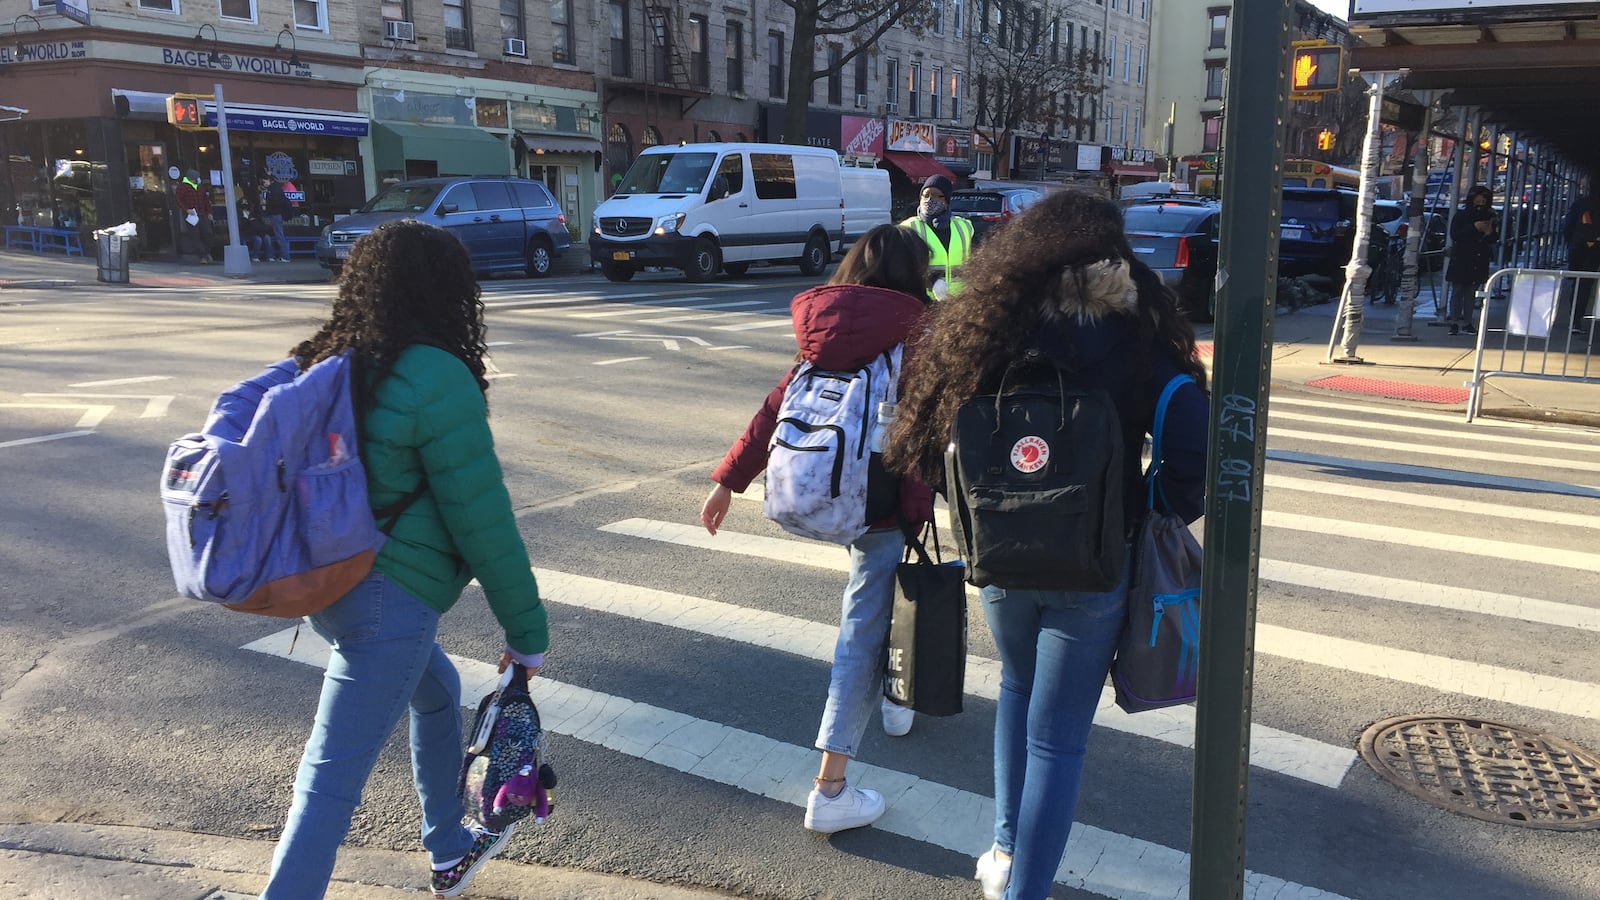 NYC middle schools reopened on Thursday, Feb. 25. Students at M.S. 51 in Park Slope, Brooklyn streamed into the building, socially distanced and masked.